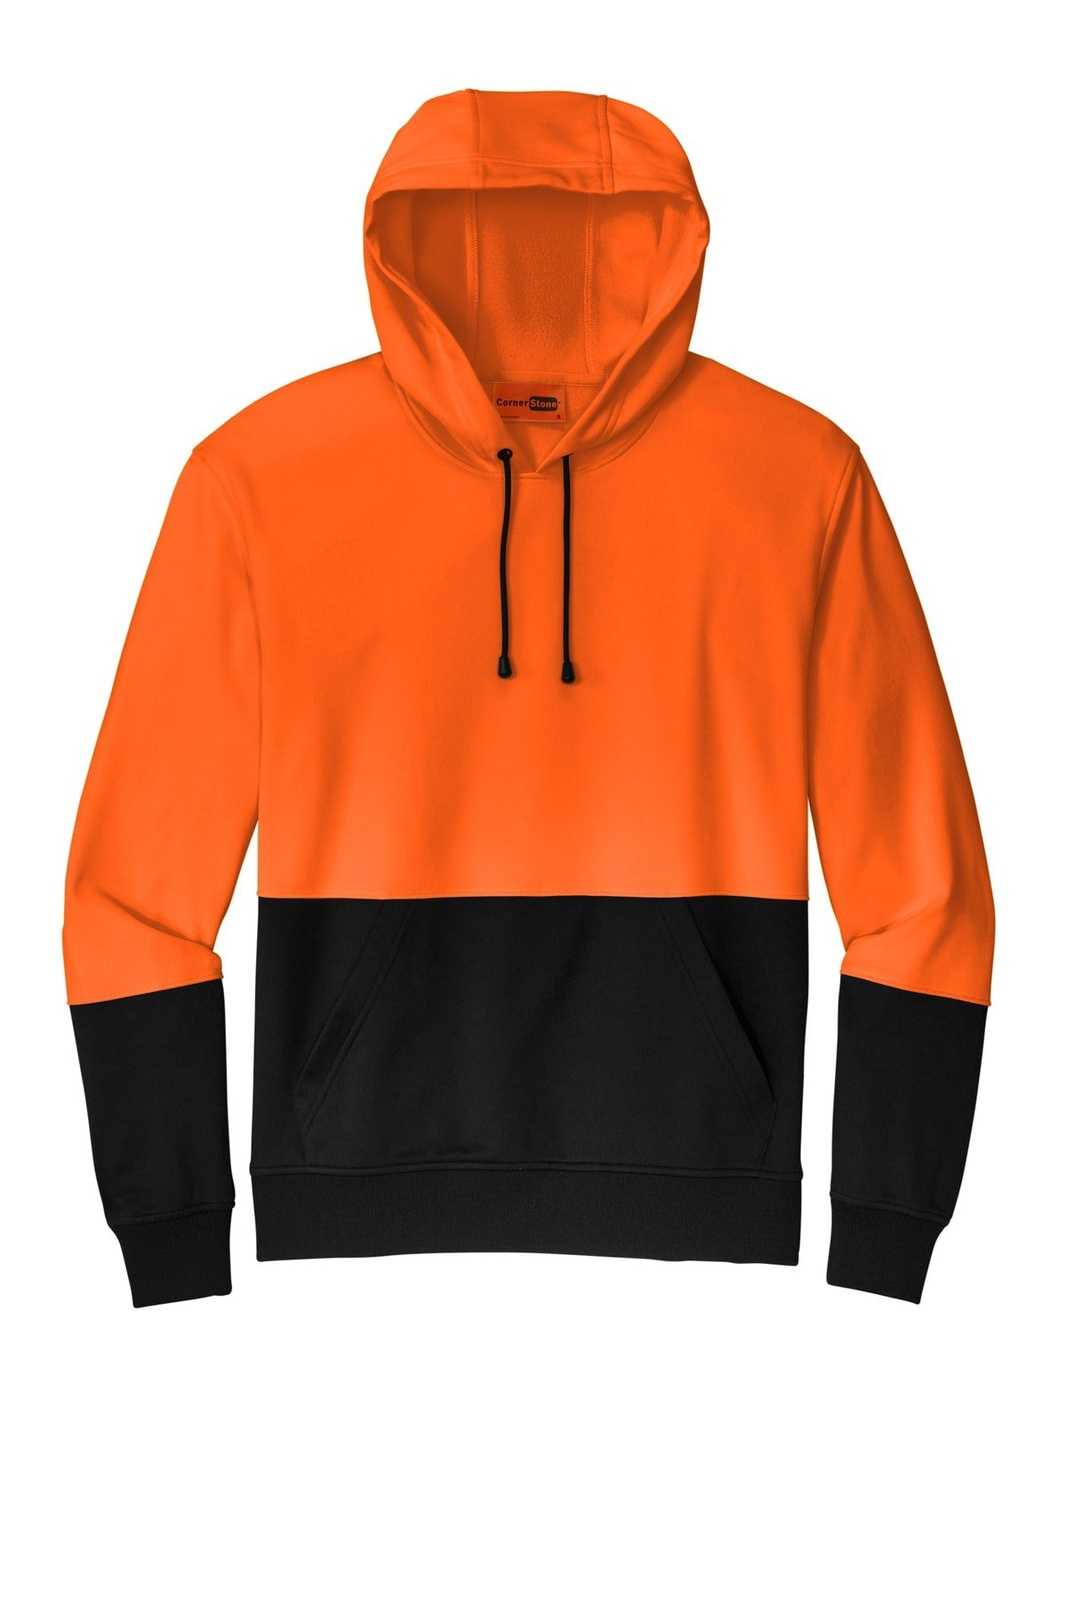 CornerStone CSF01 Enhanced Visibility Fleece Pullover Hoodie - Safety Orange - HIT a Double - 2